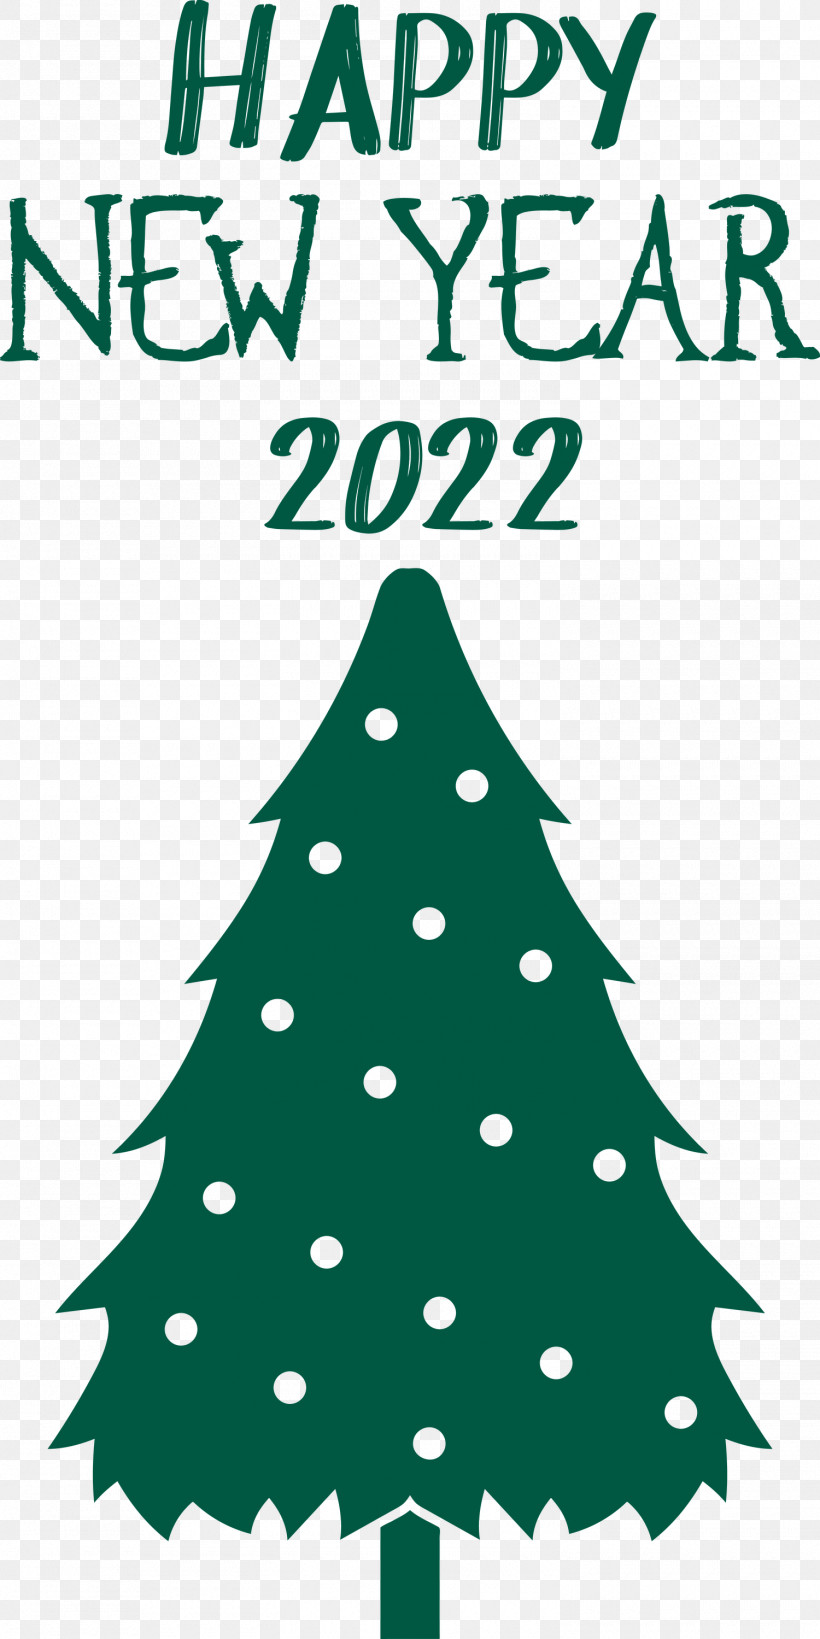 Happy New Year 2022 2022 New Year 2022, PNG, 1500x2999px, Christmas Tree, Bauble, Christmas Day, Green, Holiday Download Free